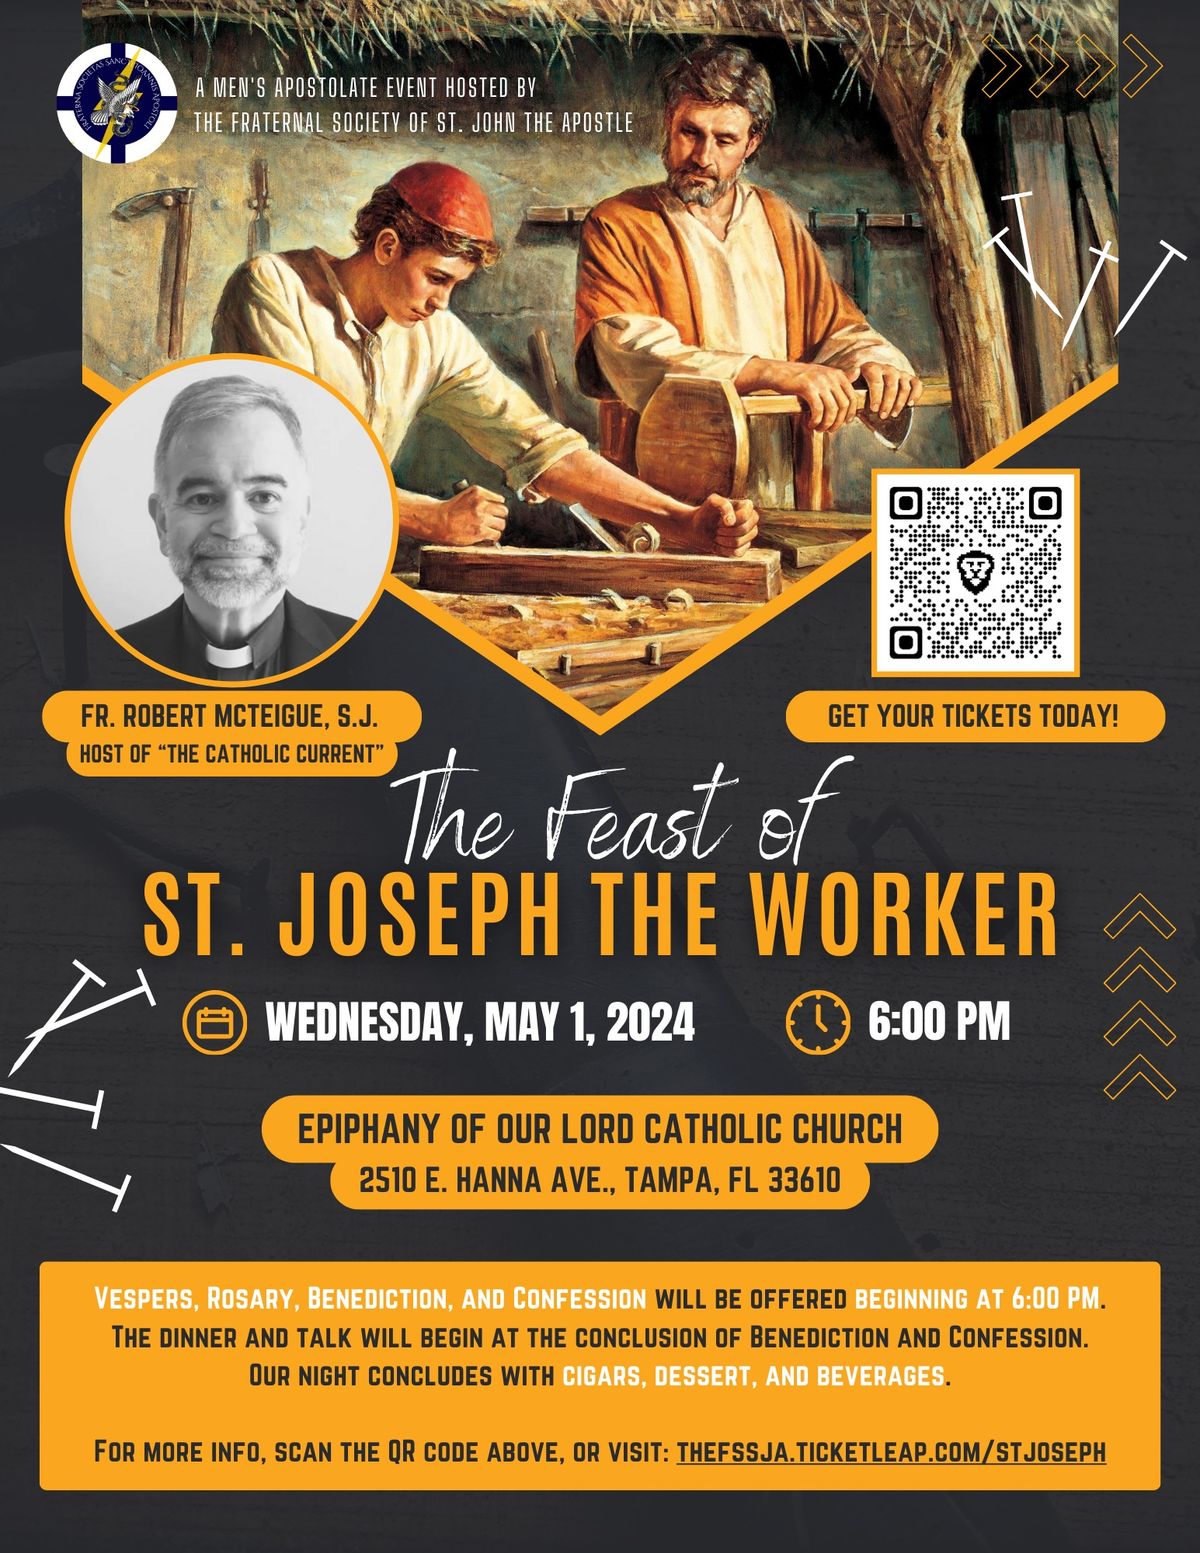 Celebration of St Joseph the Worker with Fr. Robert McTeigue